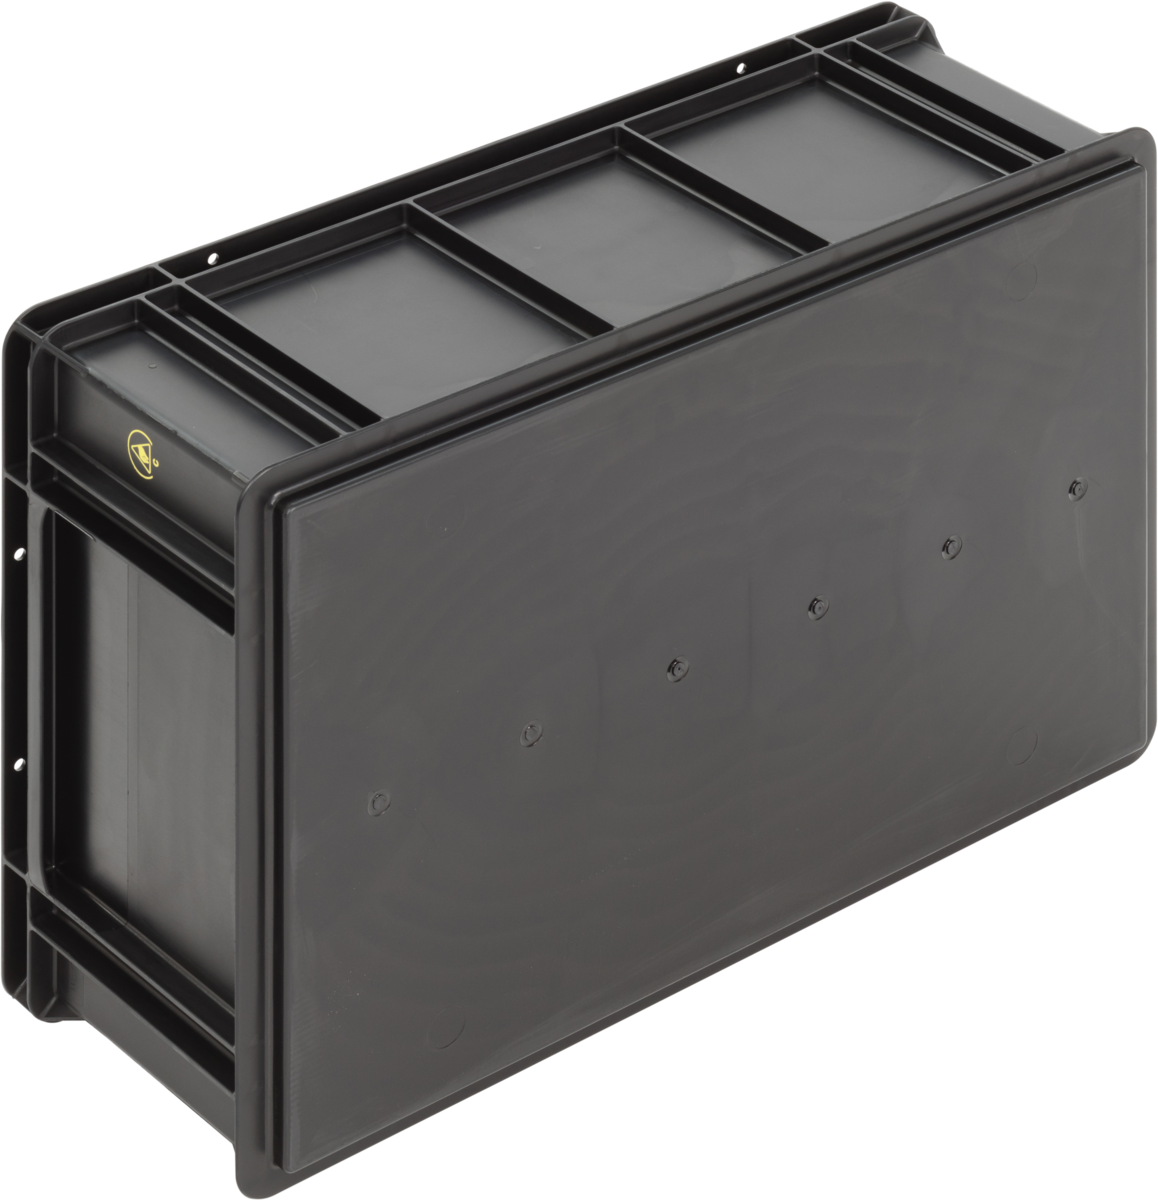 ESD-Safe-SGL-Norm-Stacking-Bin-Containers-Flat-Base-Ref.-6420.007.992_1004497_600x400x212_02